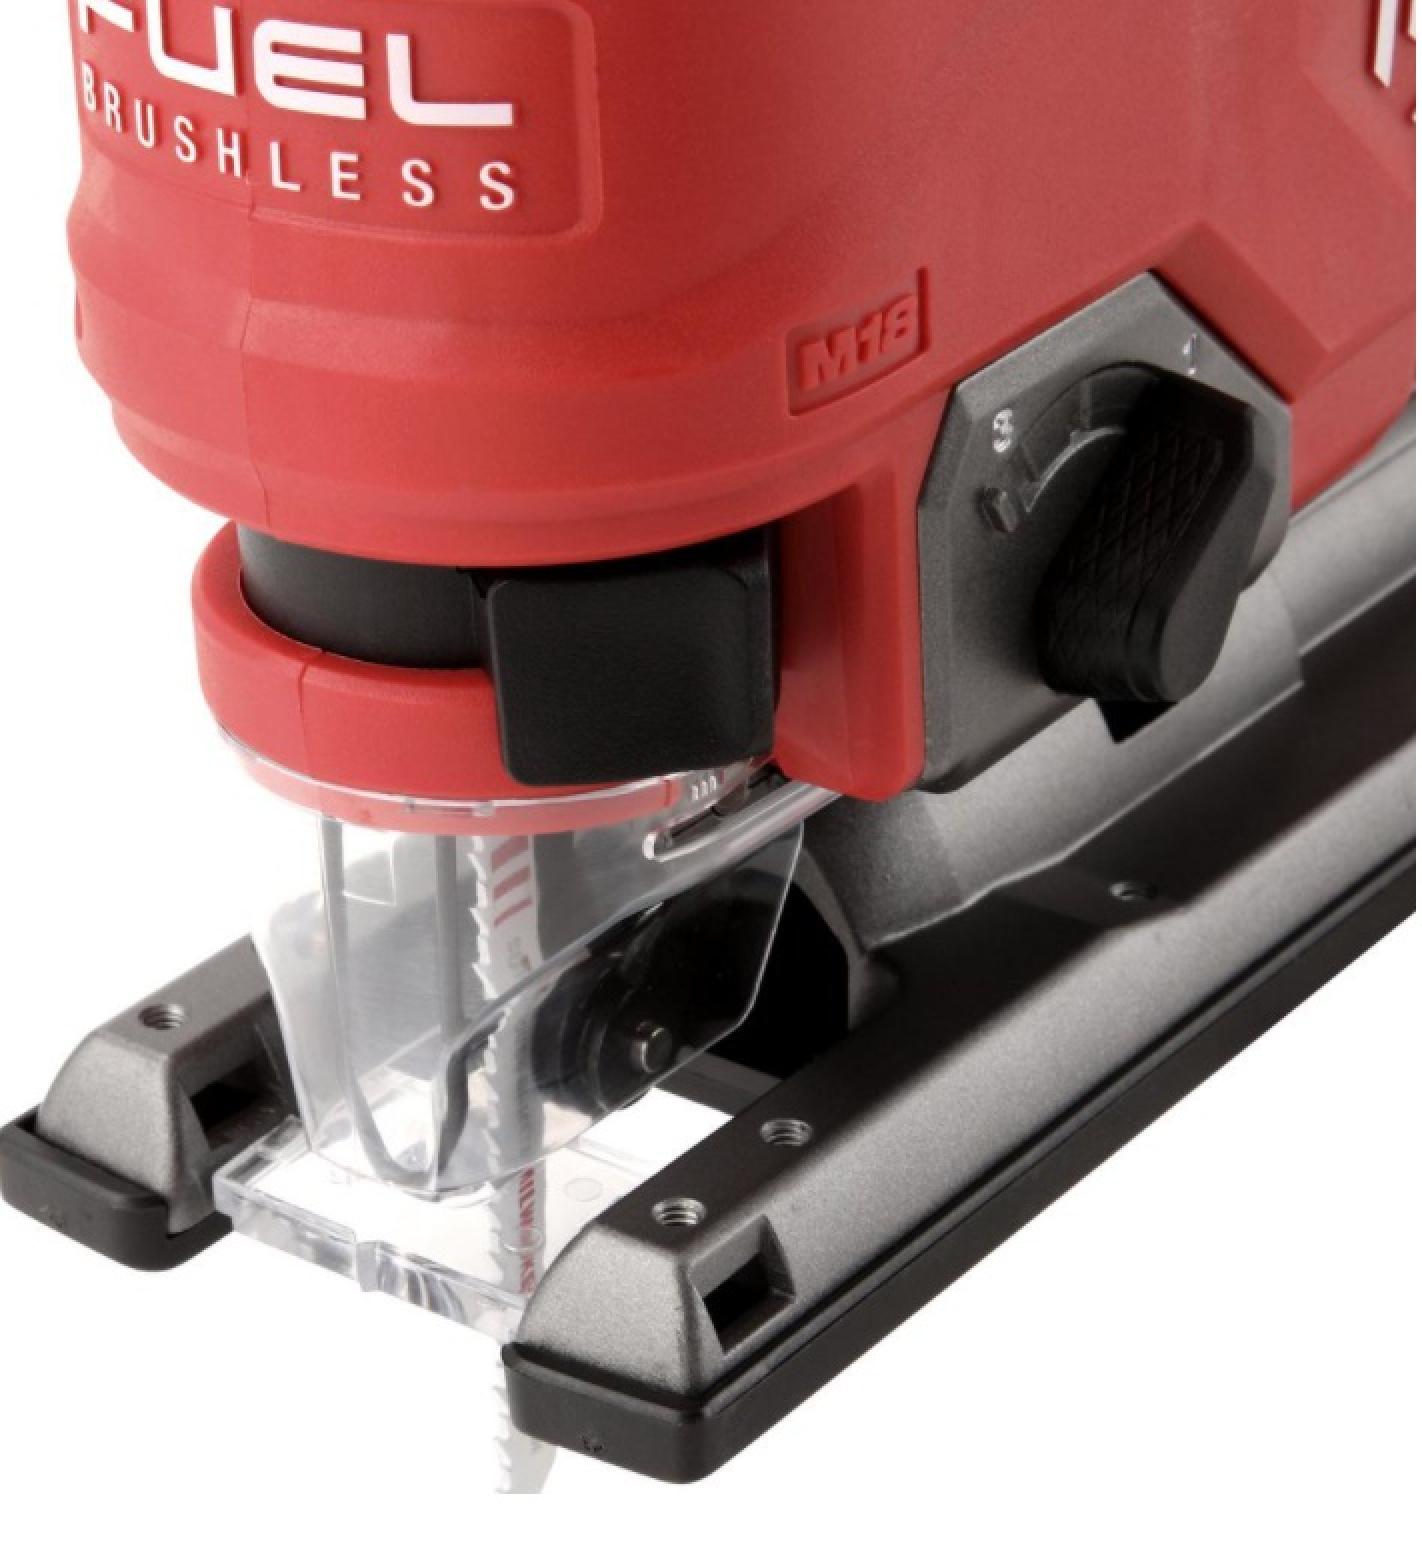 Milwaukee M18 FUEL 18-Volt Lithium-Ion Brushless Cordless Jig Saw (Tool-Only)